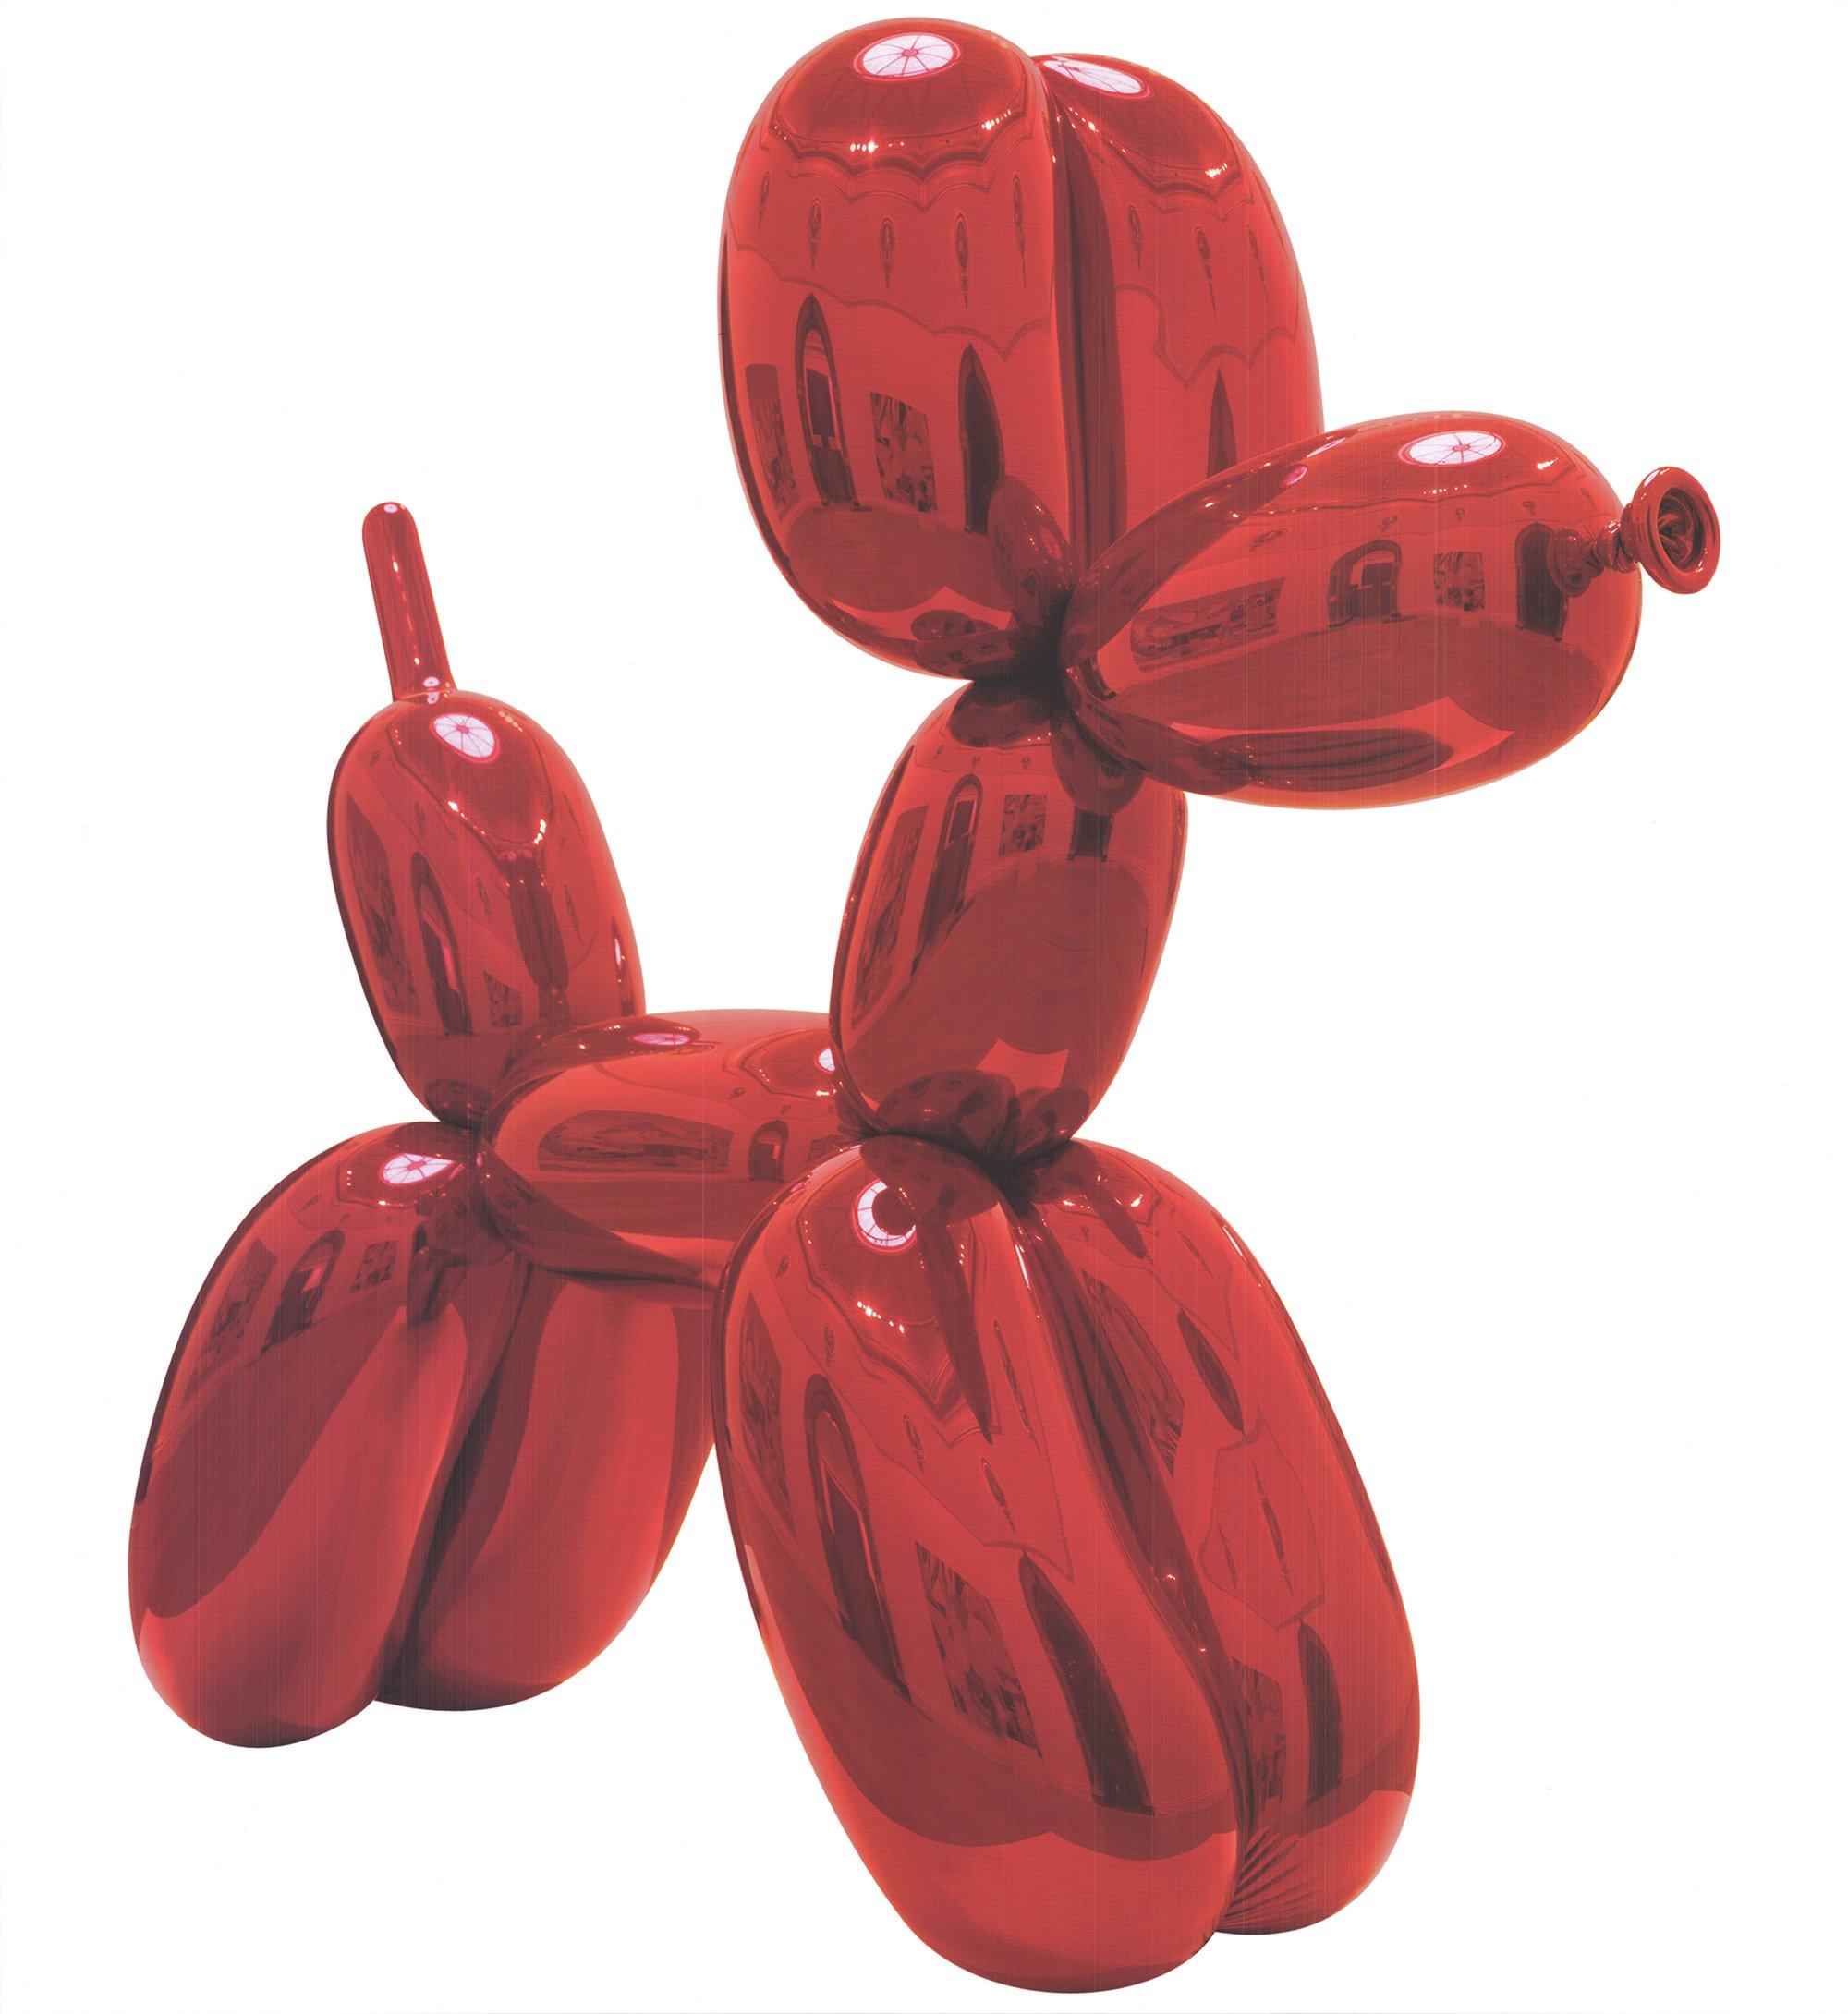 2012 After Jeff Koons 'Balloon Dog' POSTER